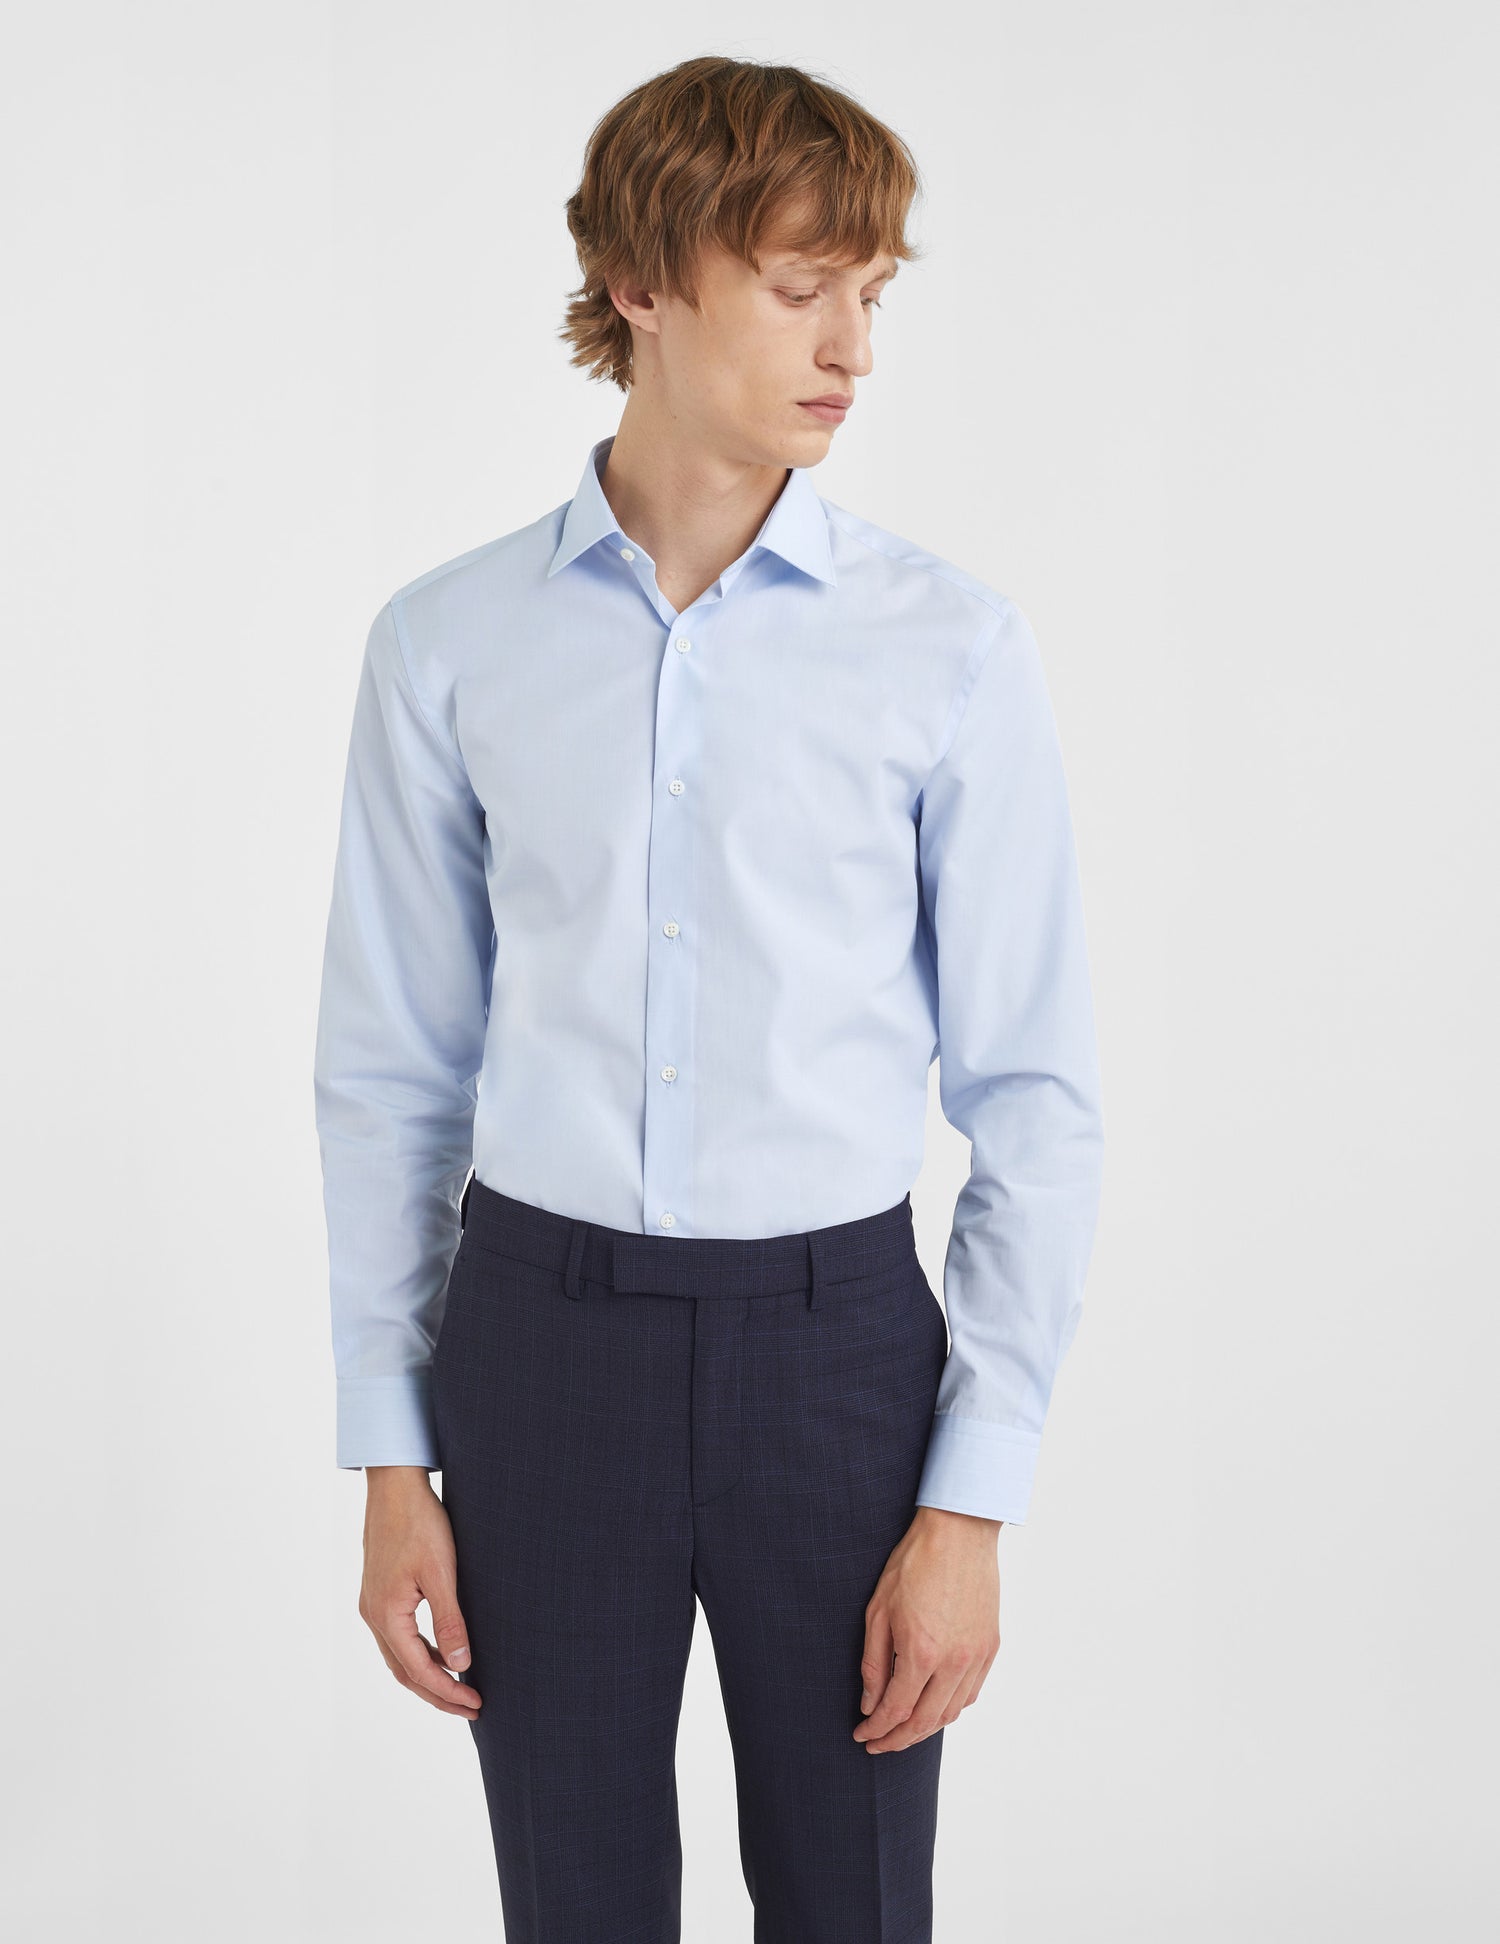 Semi-fitted blue shirt - Wire to wire - Figaret Collar#3